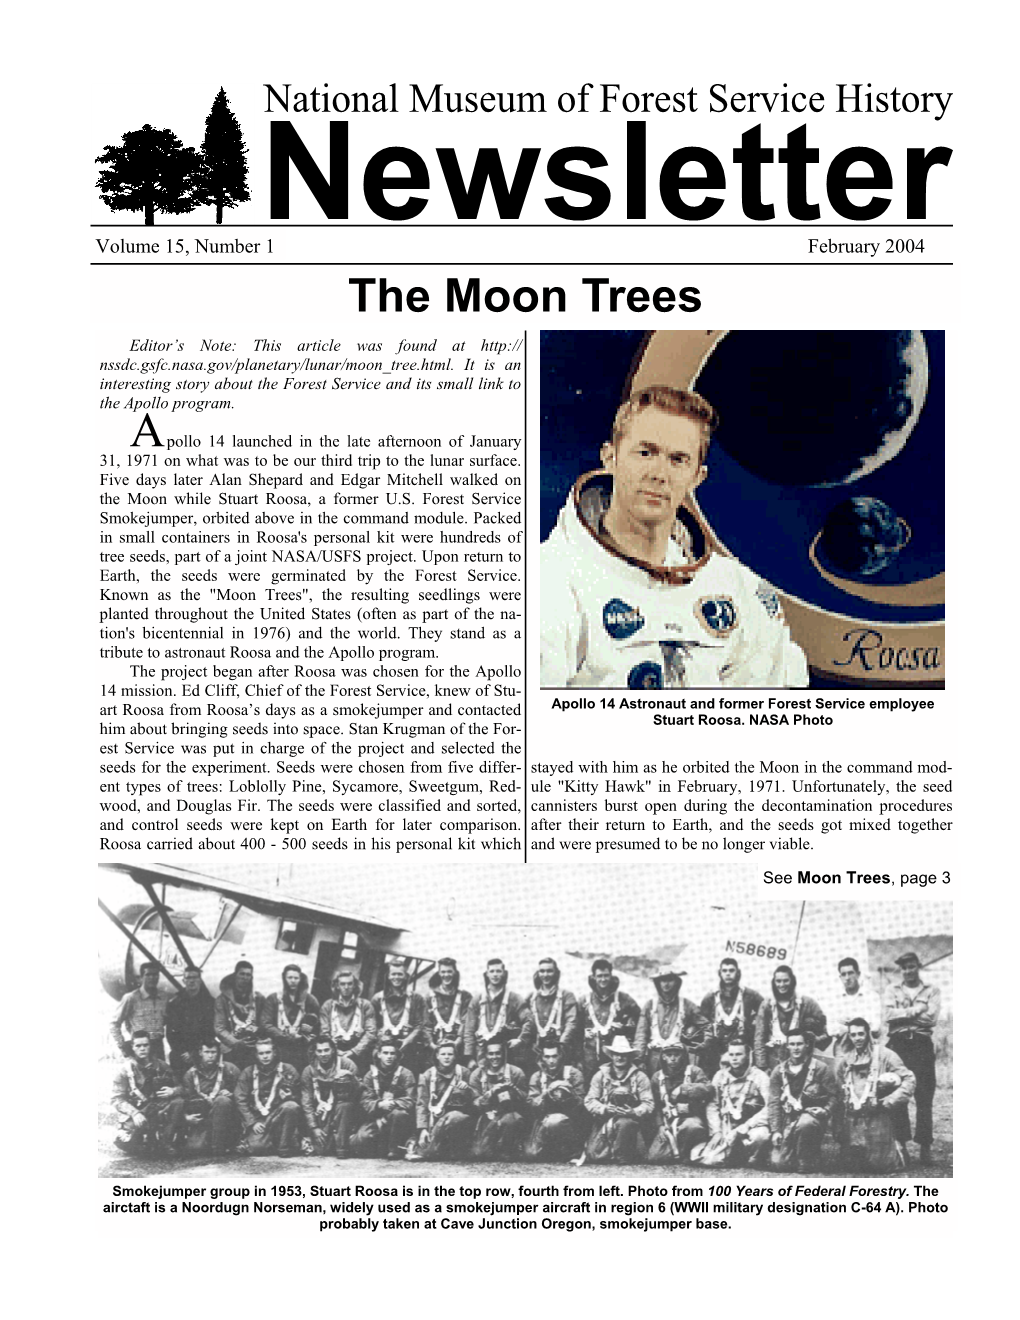 The Moon Trees Editor’S Note: This Article Was Found at Nssdc.Gsfc.Nasa.Gov/Planetary/Lunar/Moon Tree.Html